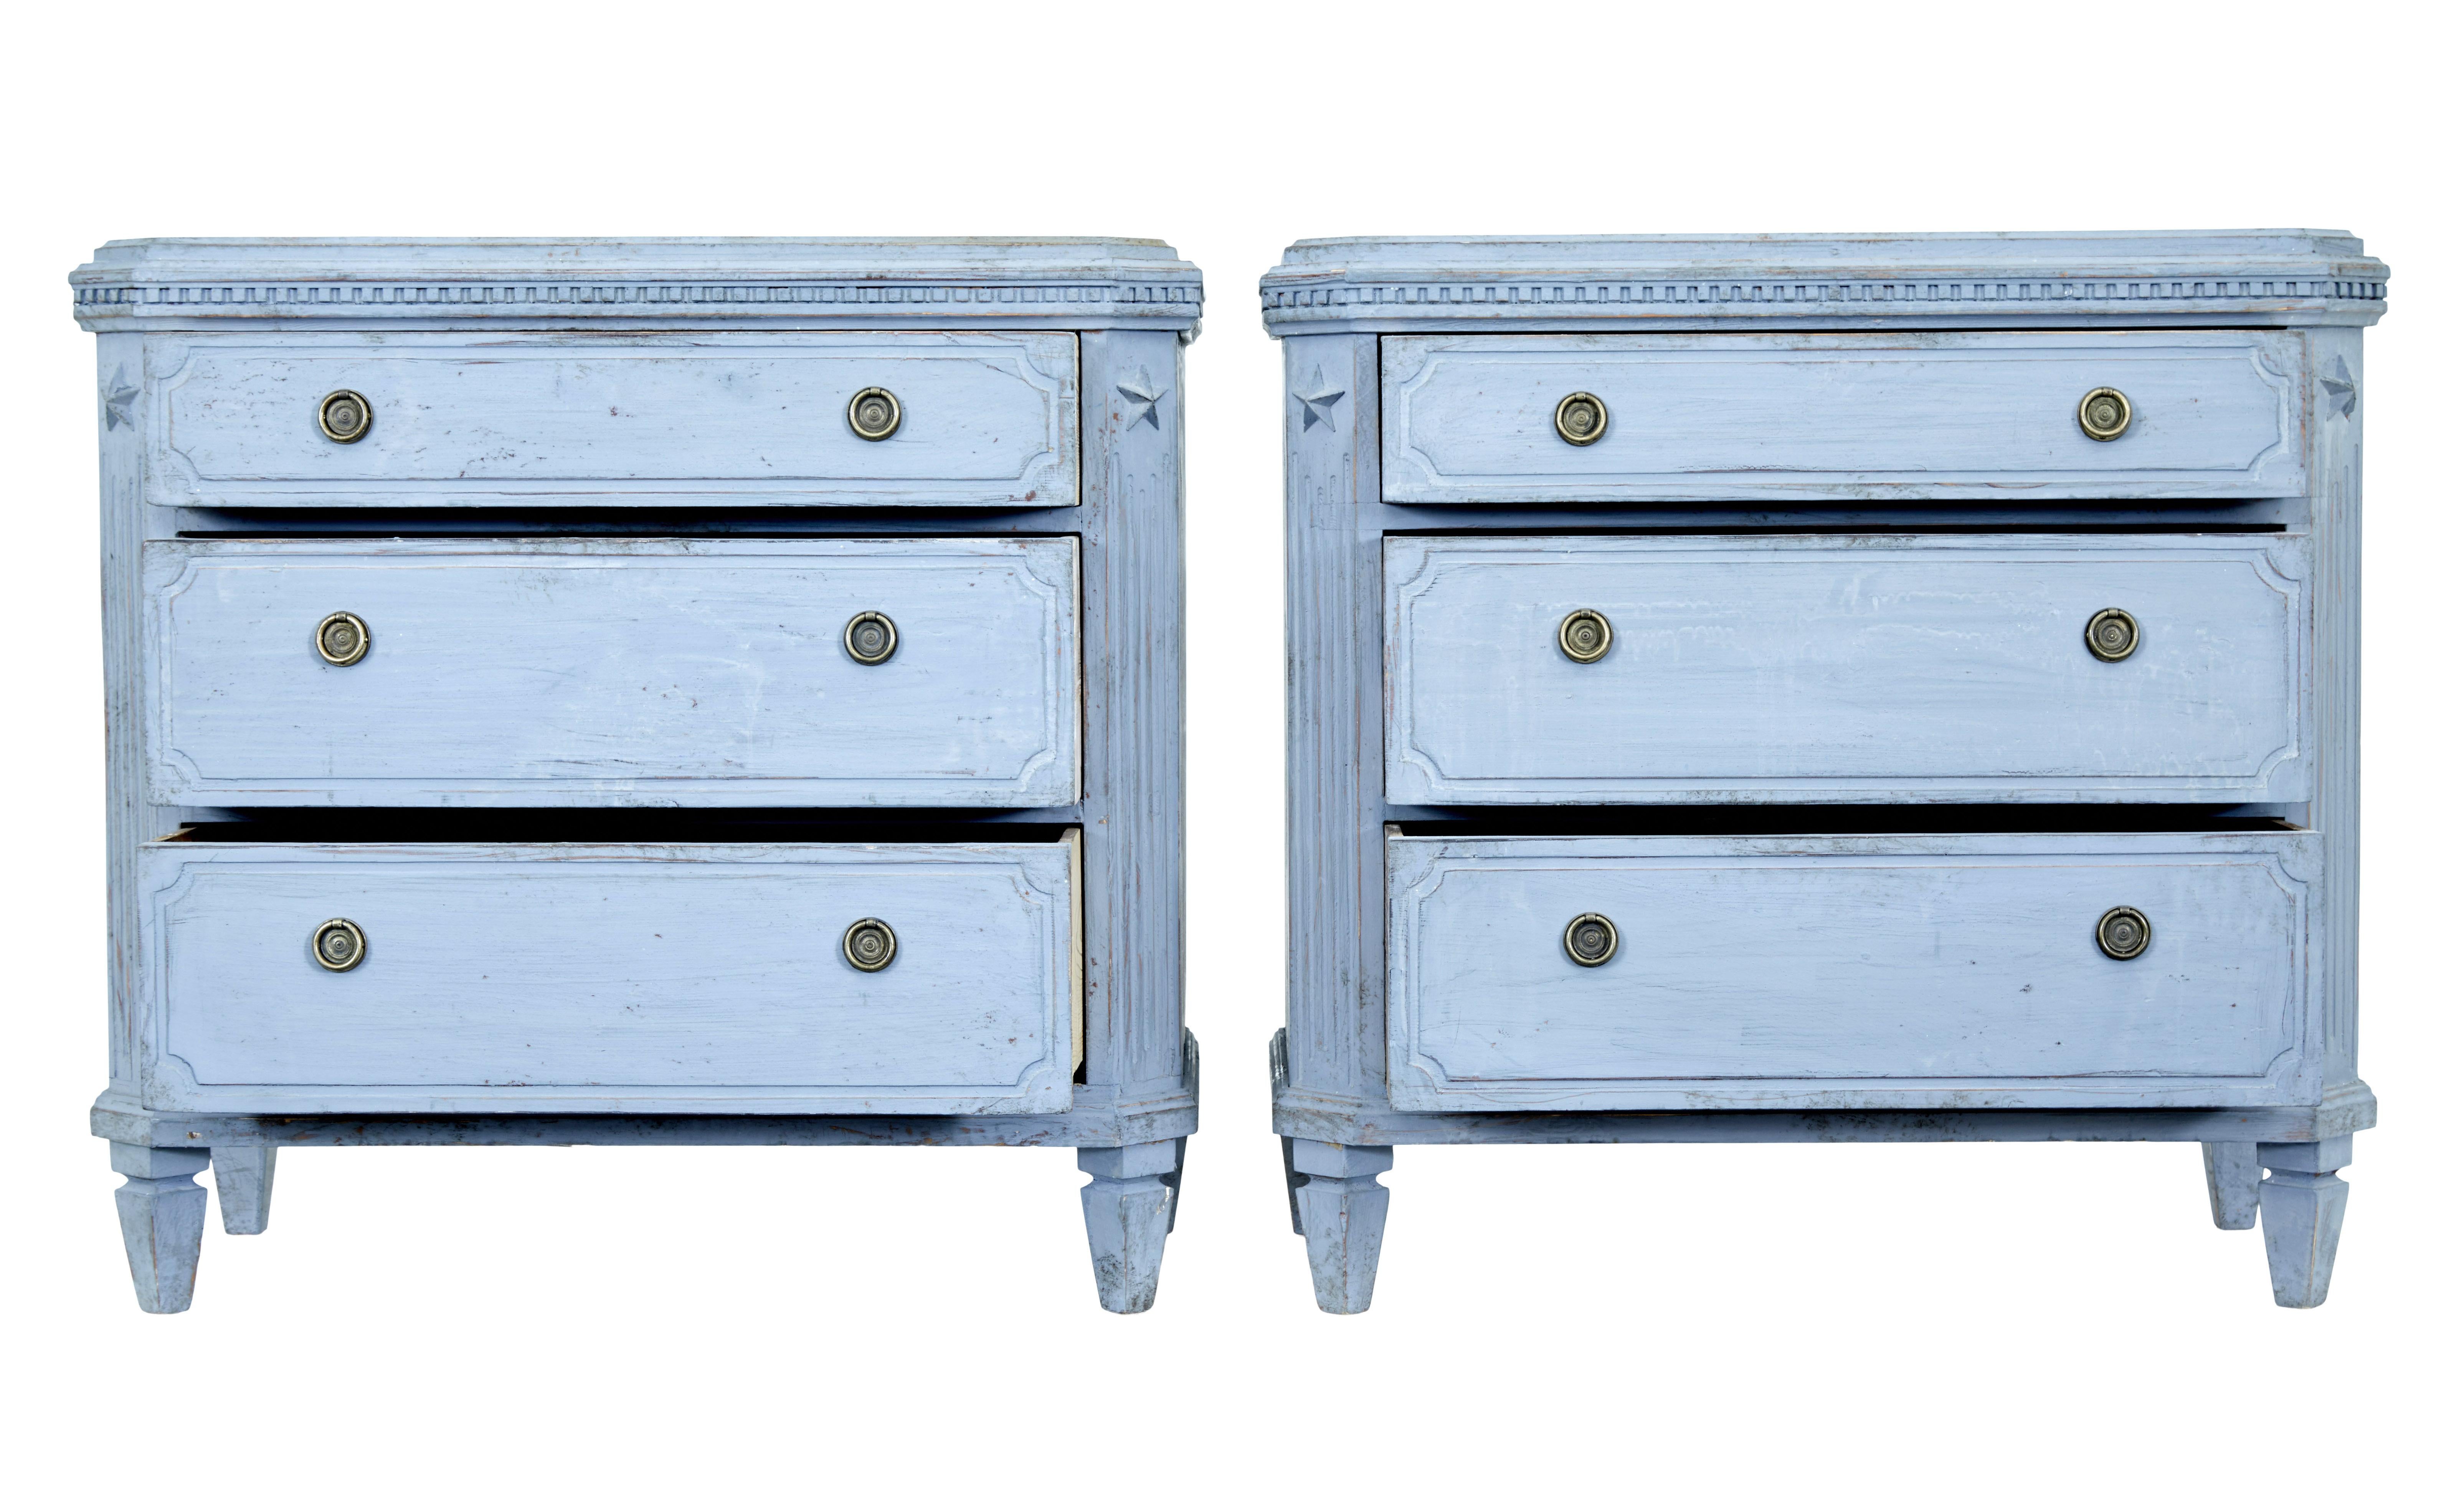 Swedish pair of 19th century painted blue commodes circa 1870.

Fine quality pair of painted Swedish chest of drawers. Shaped tops with dentil frieze detailing, canted corners with applied star and channeled detail. Short top drawer with a further